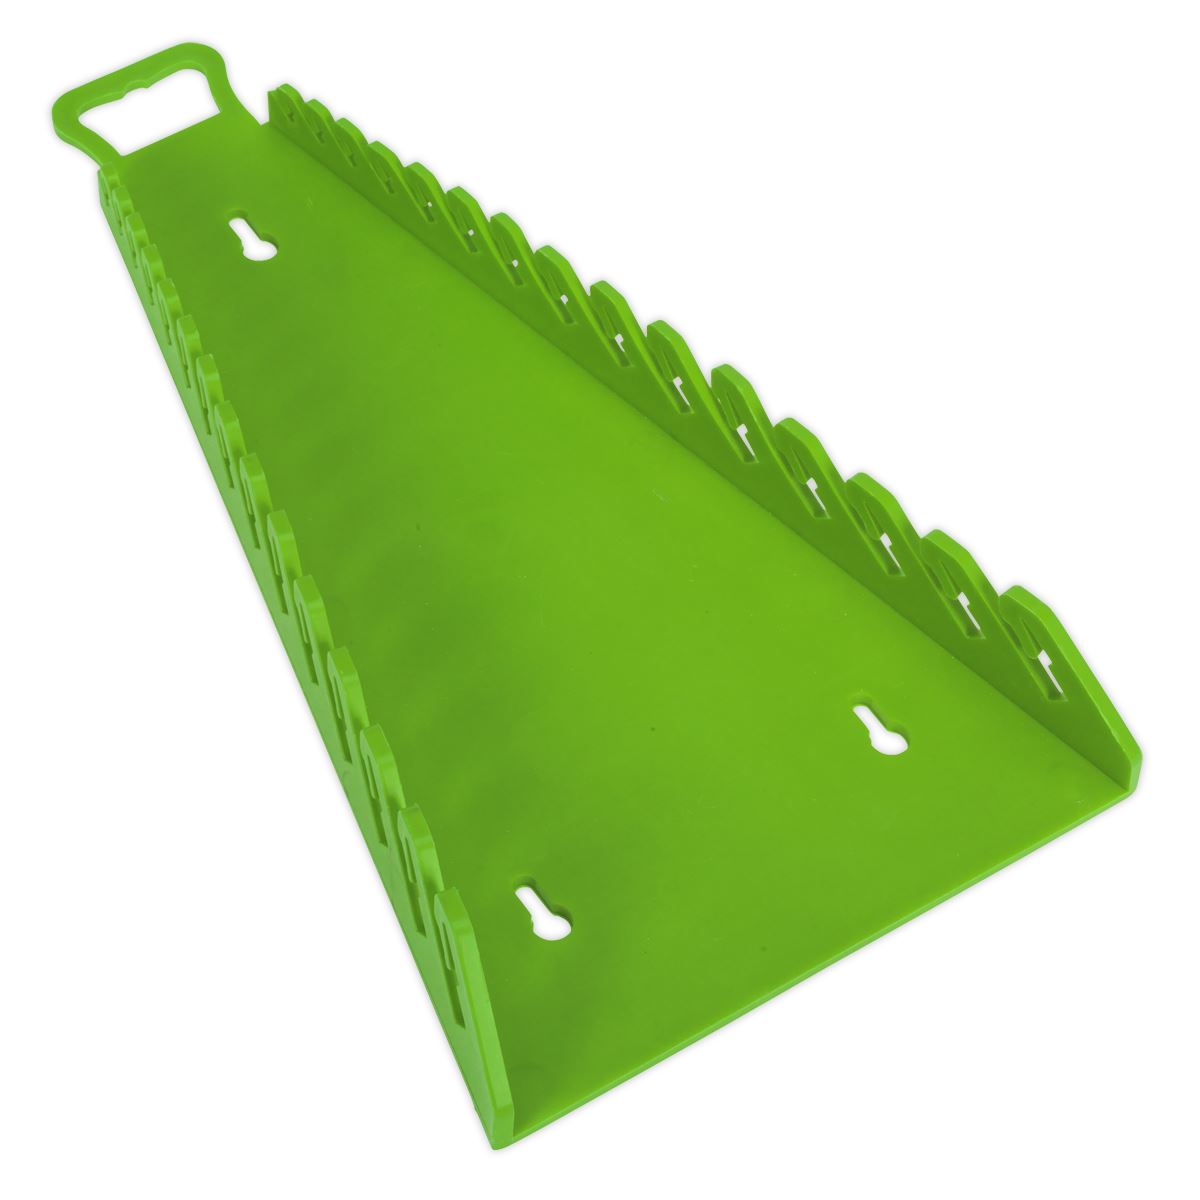 Sealey Premier High Visibility Green Reverse Spanner Rack 15 Capacity Hanging Toolbox